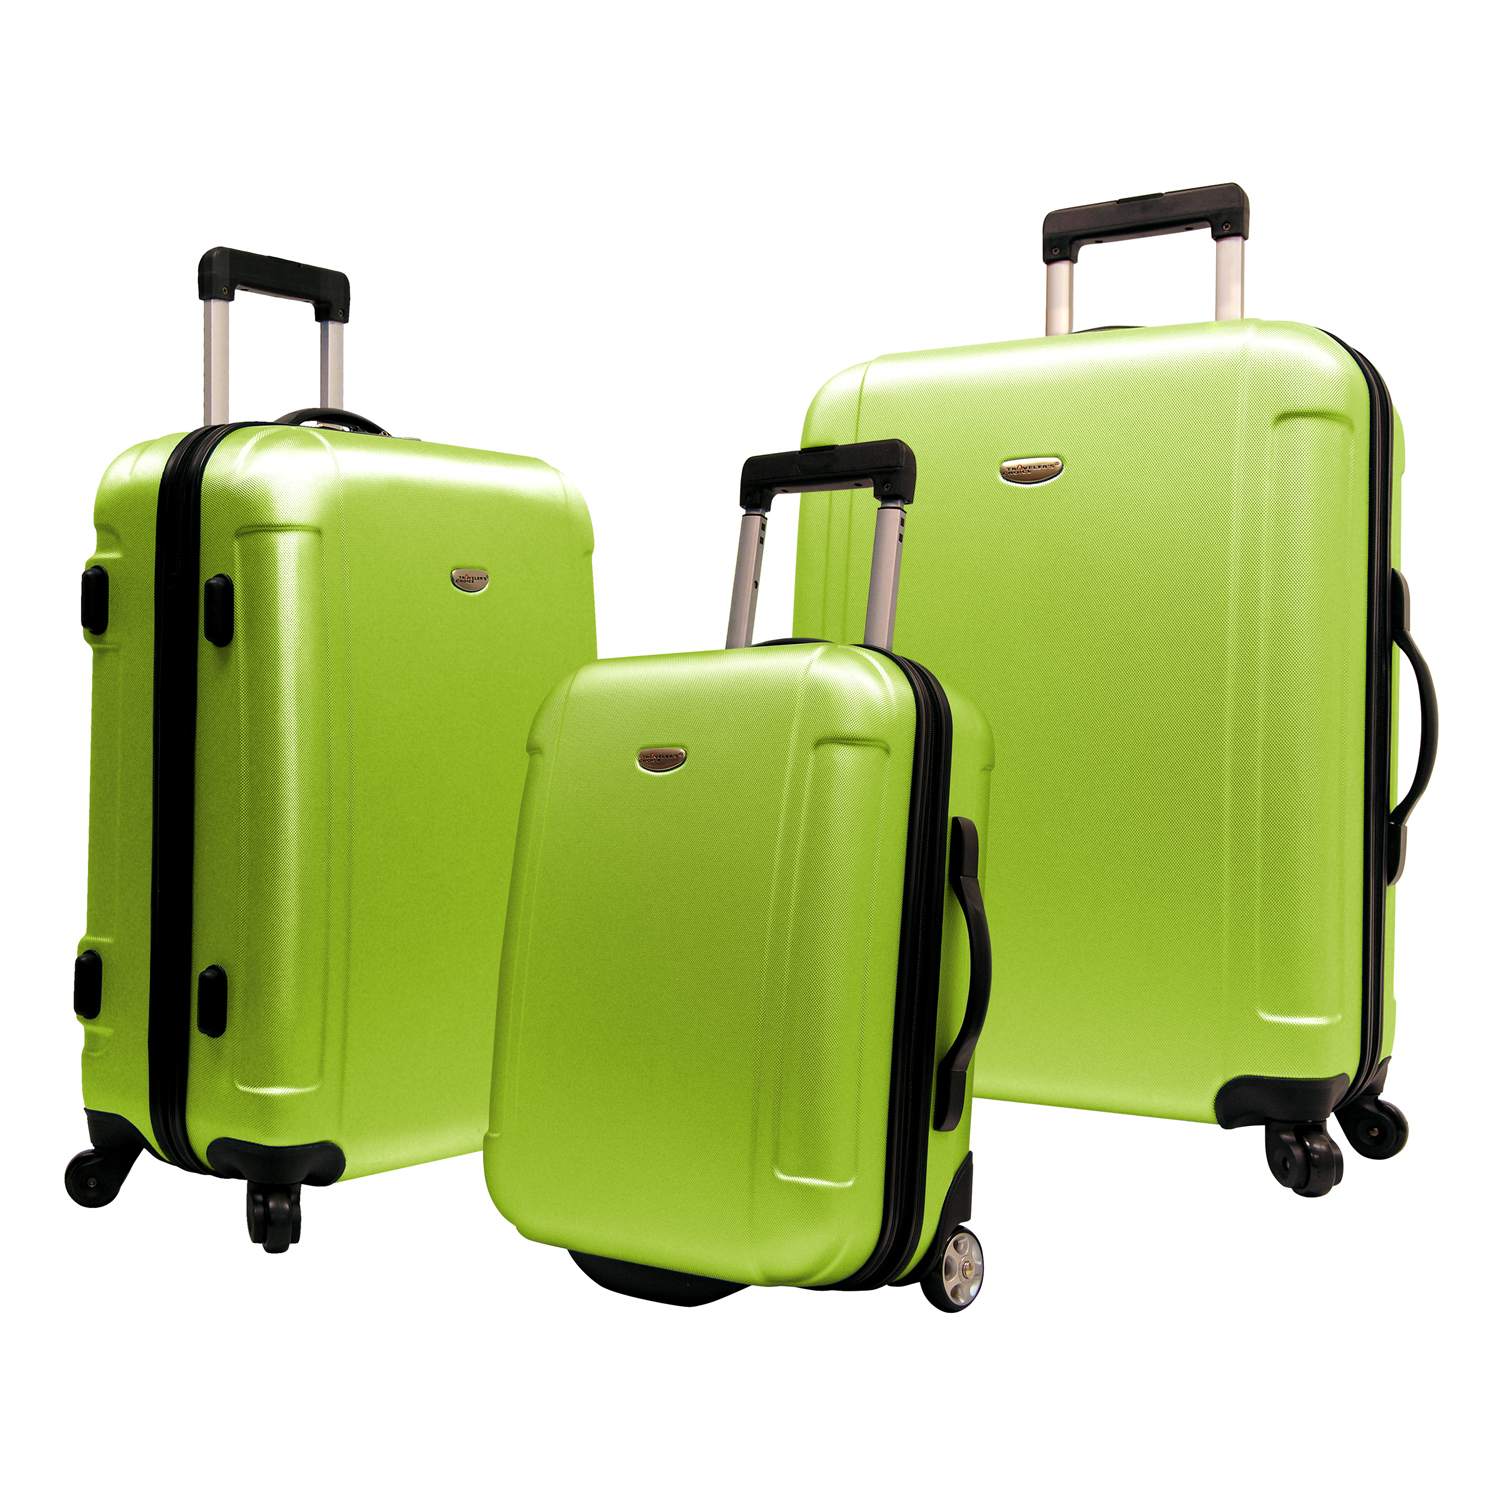 Traveler's Choice Freedom 3-Piece Ultra-Lightweight Hardside Spinners & Roller Luggage Set - 21" 25" 29" - image 3 of 10